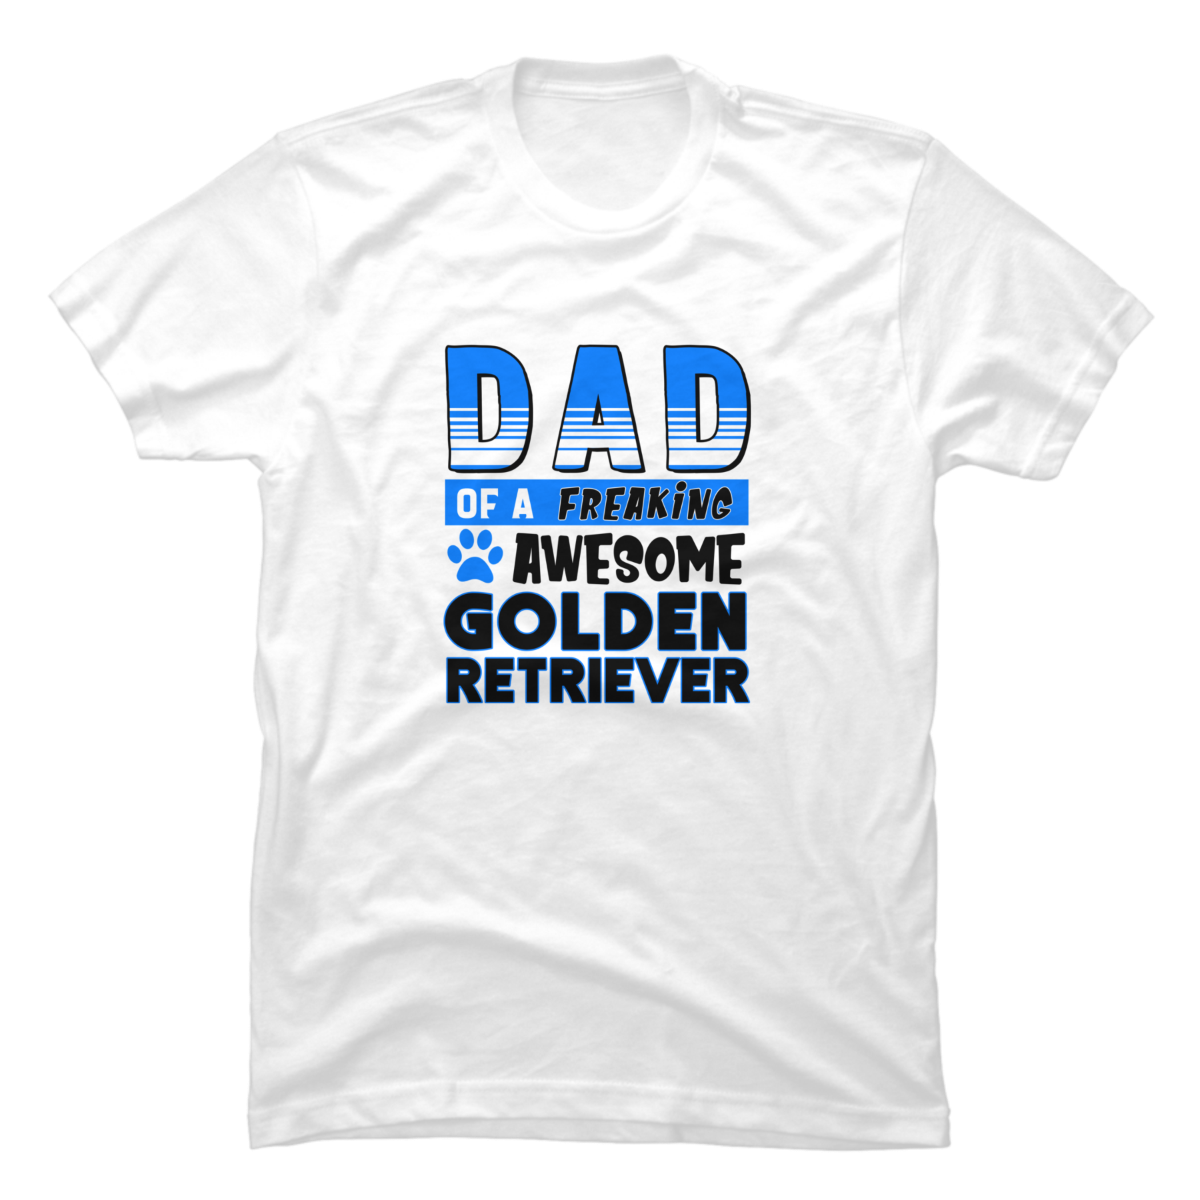 Dad Of A Freaking Awesome Golden Retriever - Buy t-shirt designs